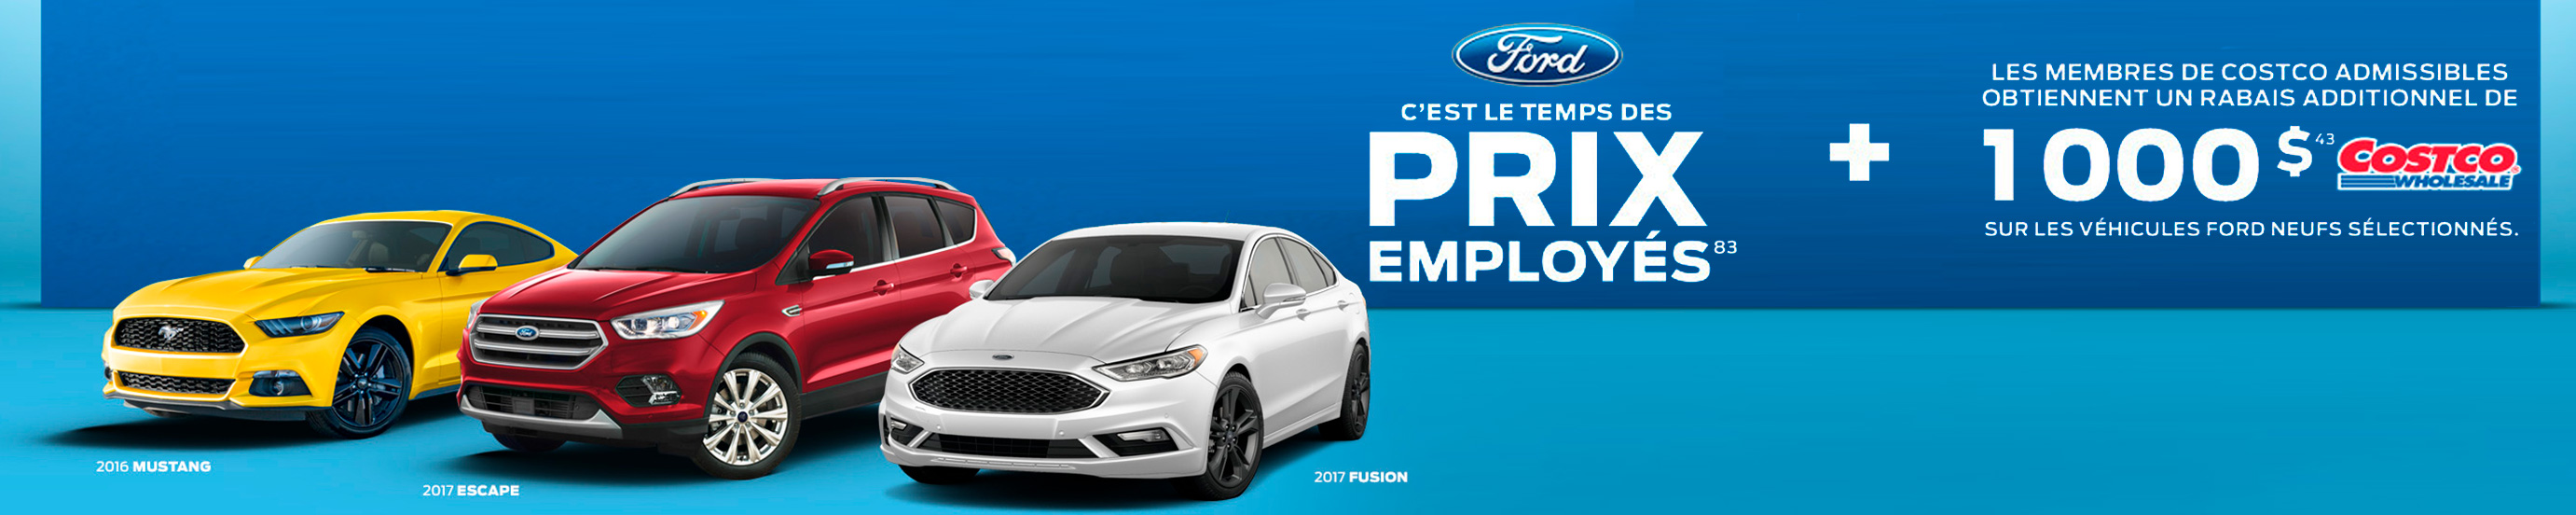 Concessionnaire ford valleyfield #4